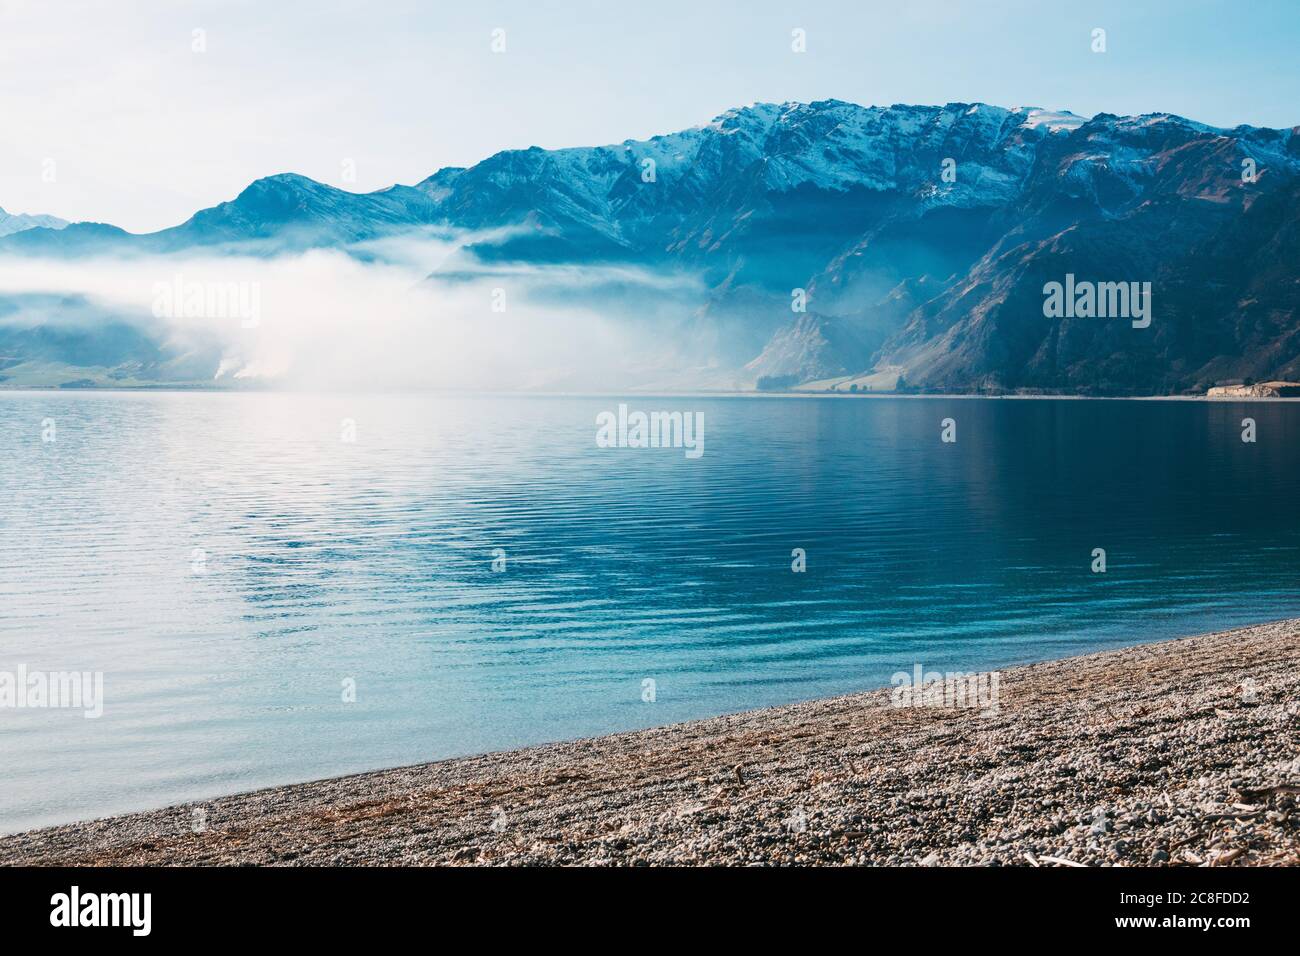 Smoke from a burn off expands across the bay on a perfectly still day at Lake Hawea, New Zealand Stock Photo